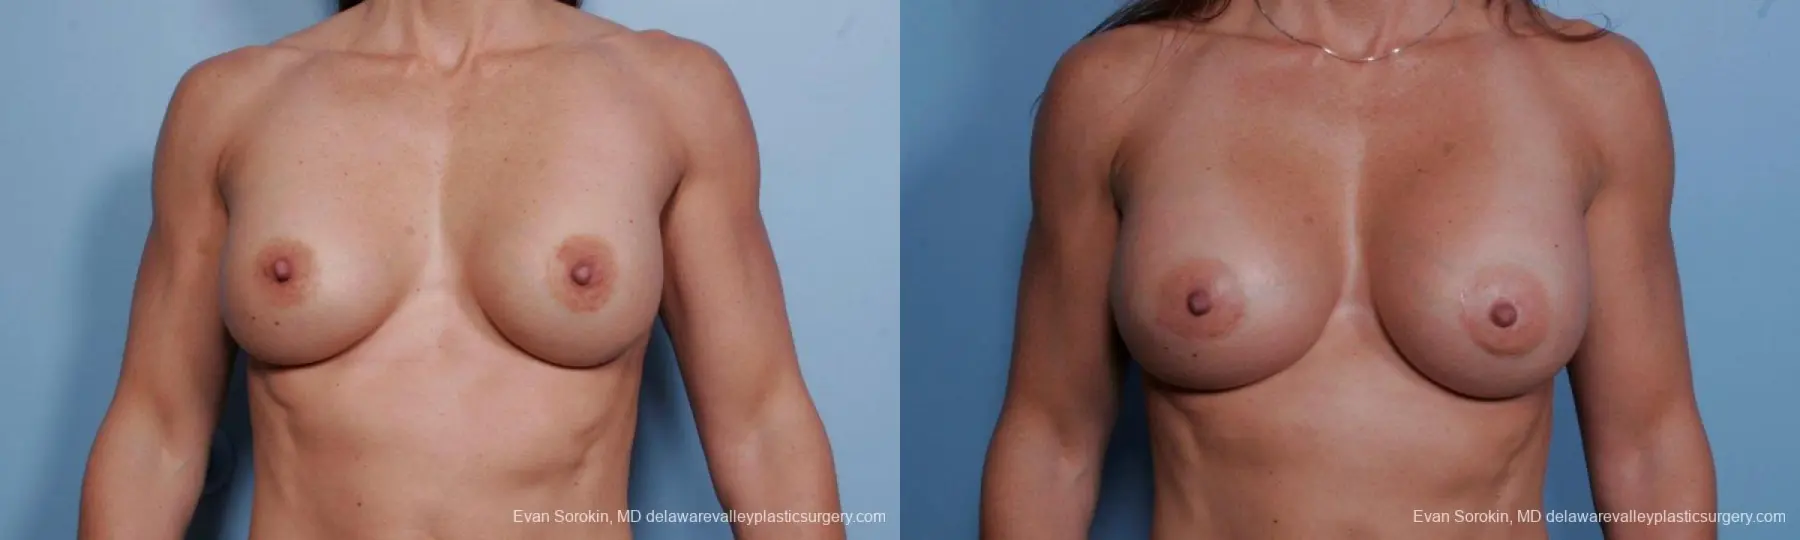 Philadelphia Breast Augmentation 9455 - Before and After 1